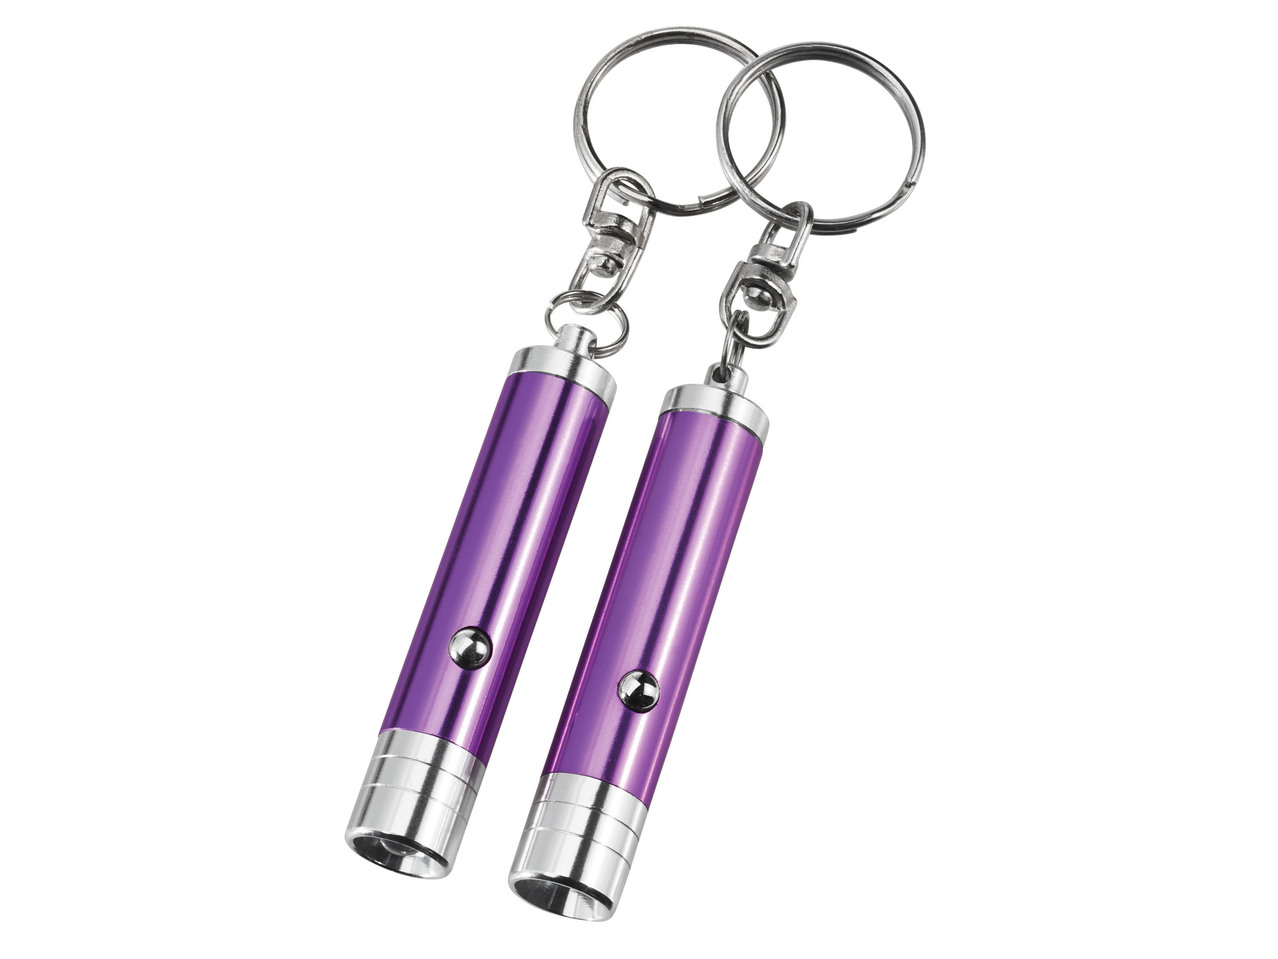 LED Keyring Torches, 2 pieces